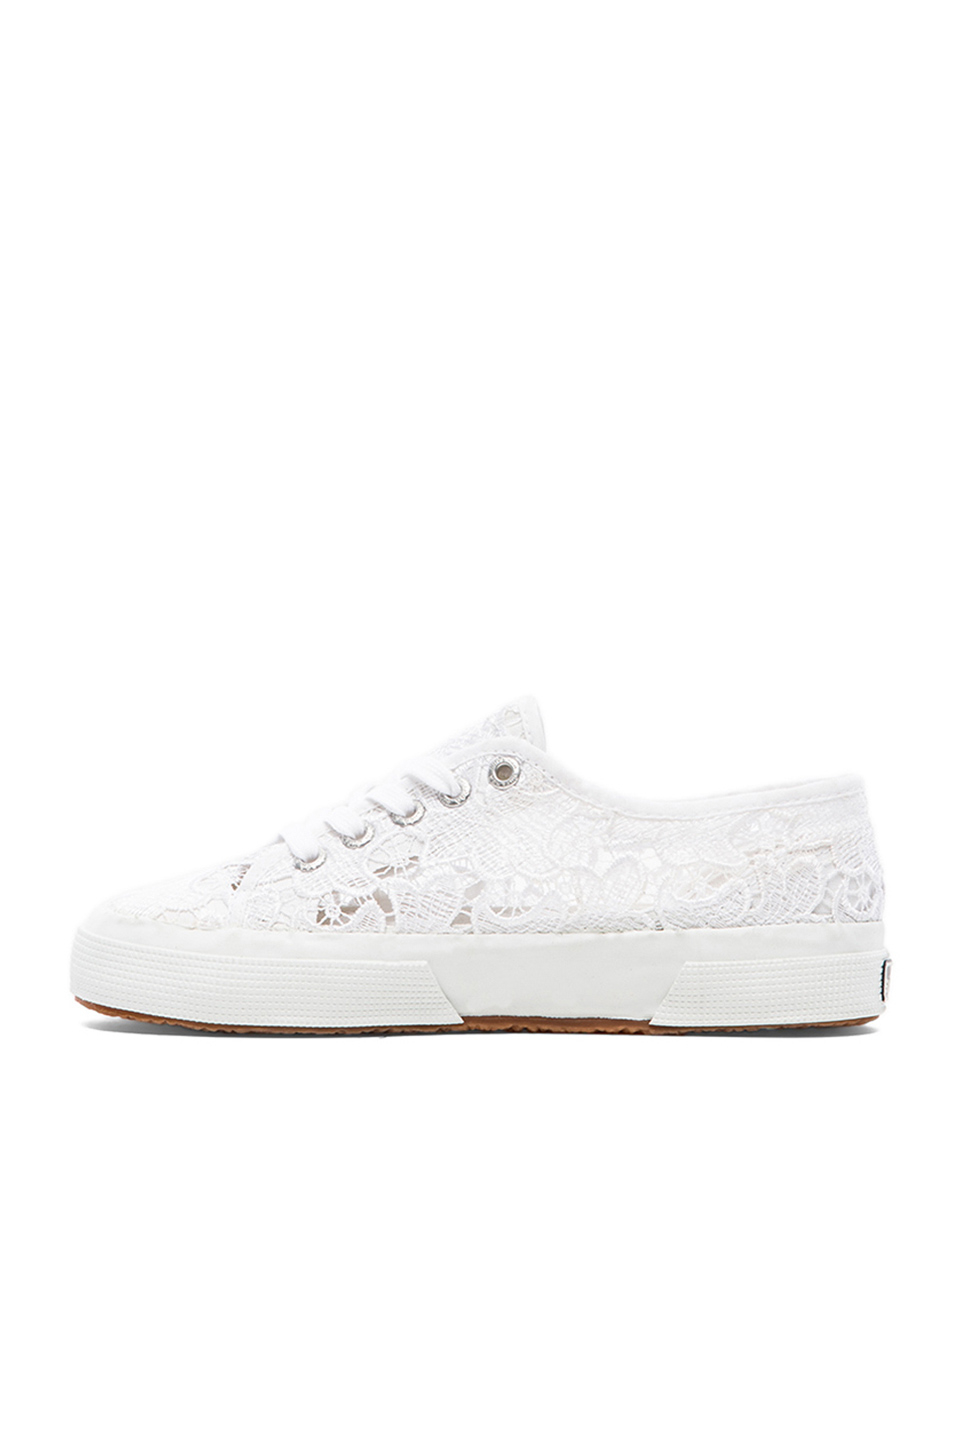 Lyst - Superga Lace Lace-Up Sneakers in White